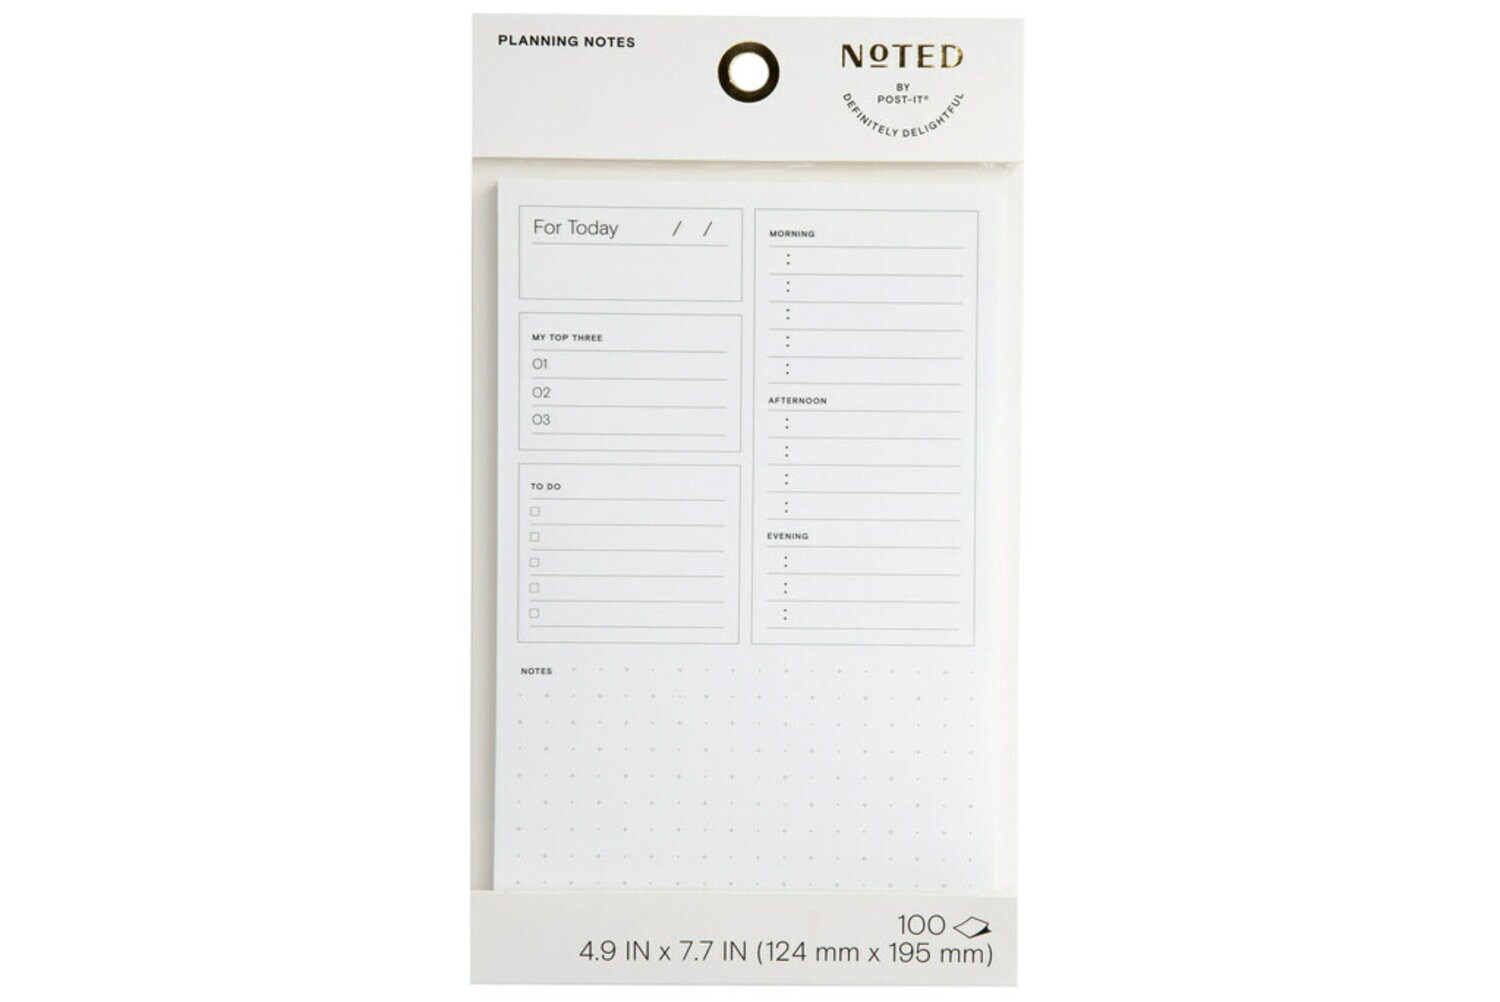 7100275429 - Post-it Planning Notes NTD6-58-1, 4.9 in x 7.7 in (124 mm x 195 mm)